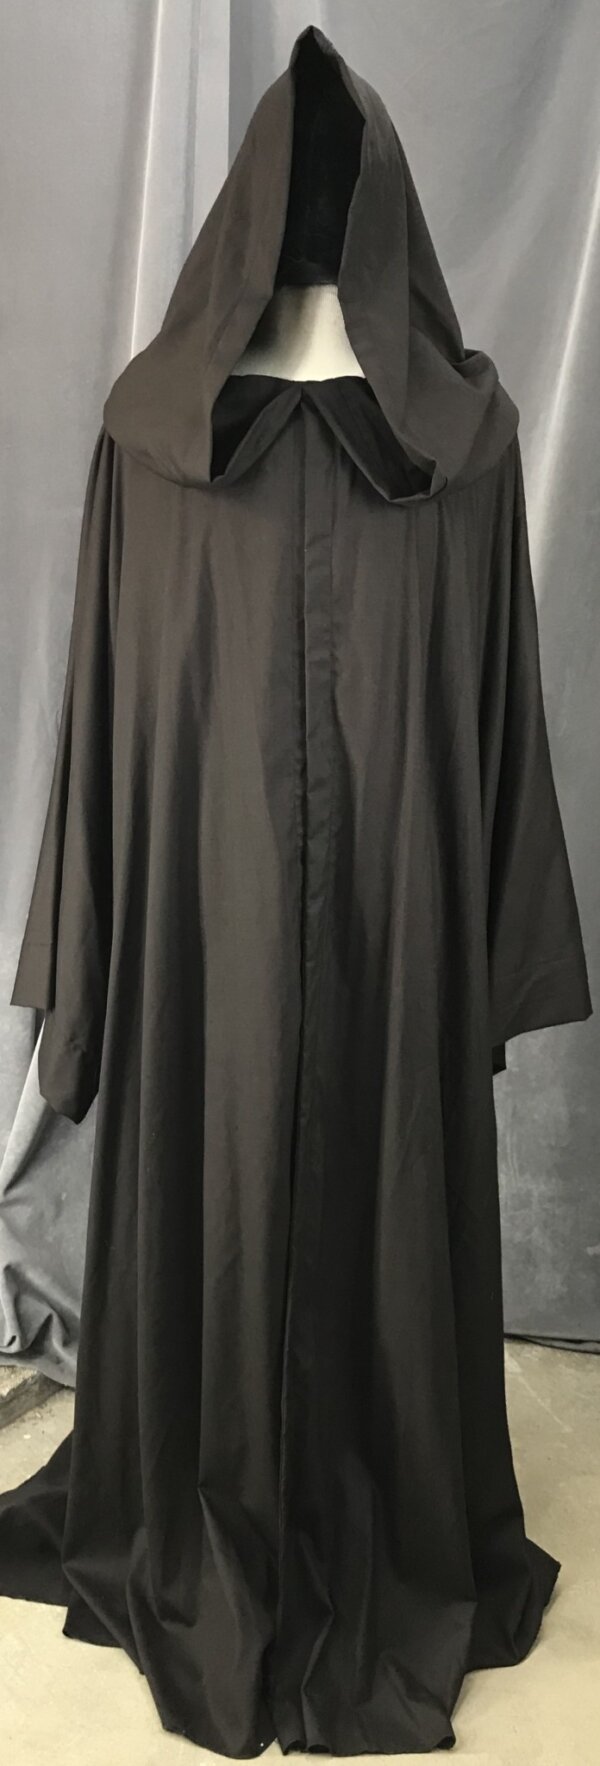 R461 - Washable XXL Seal Brown Jedi Robe with Pockets, Hidden clasp